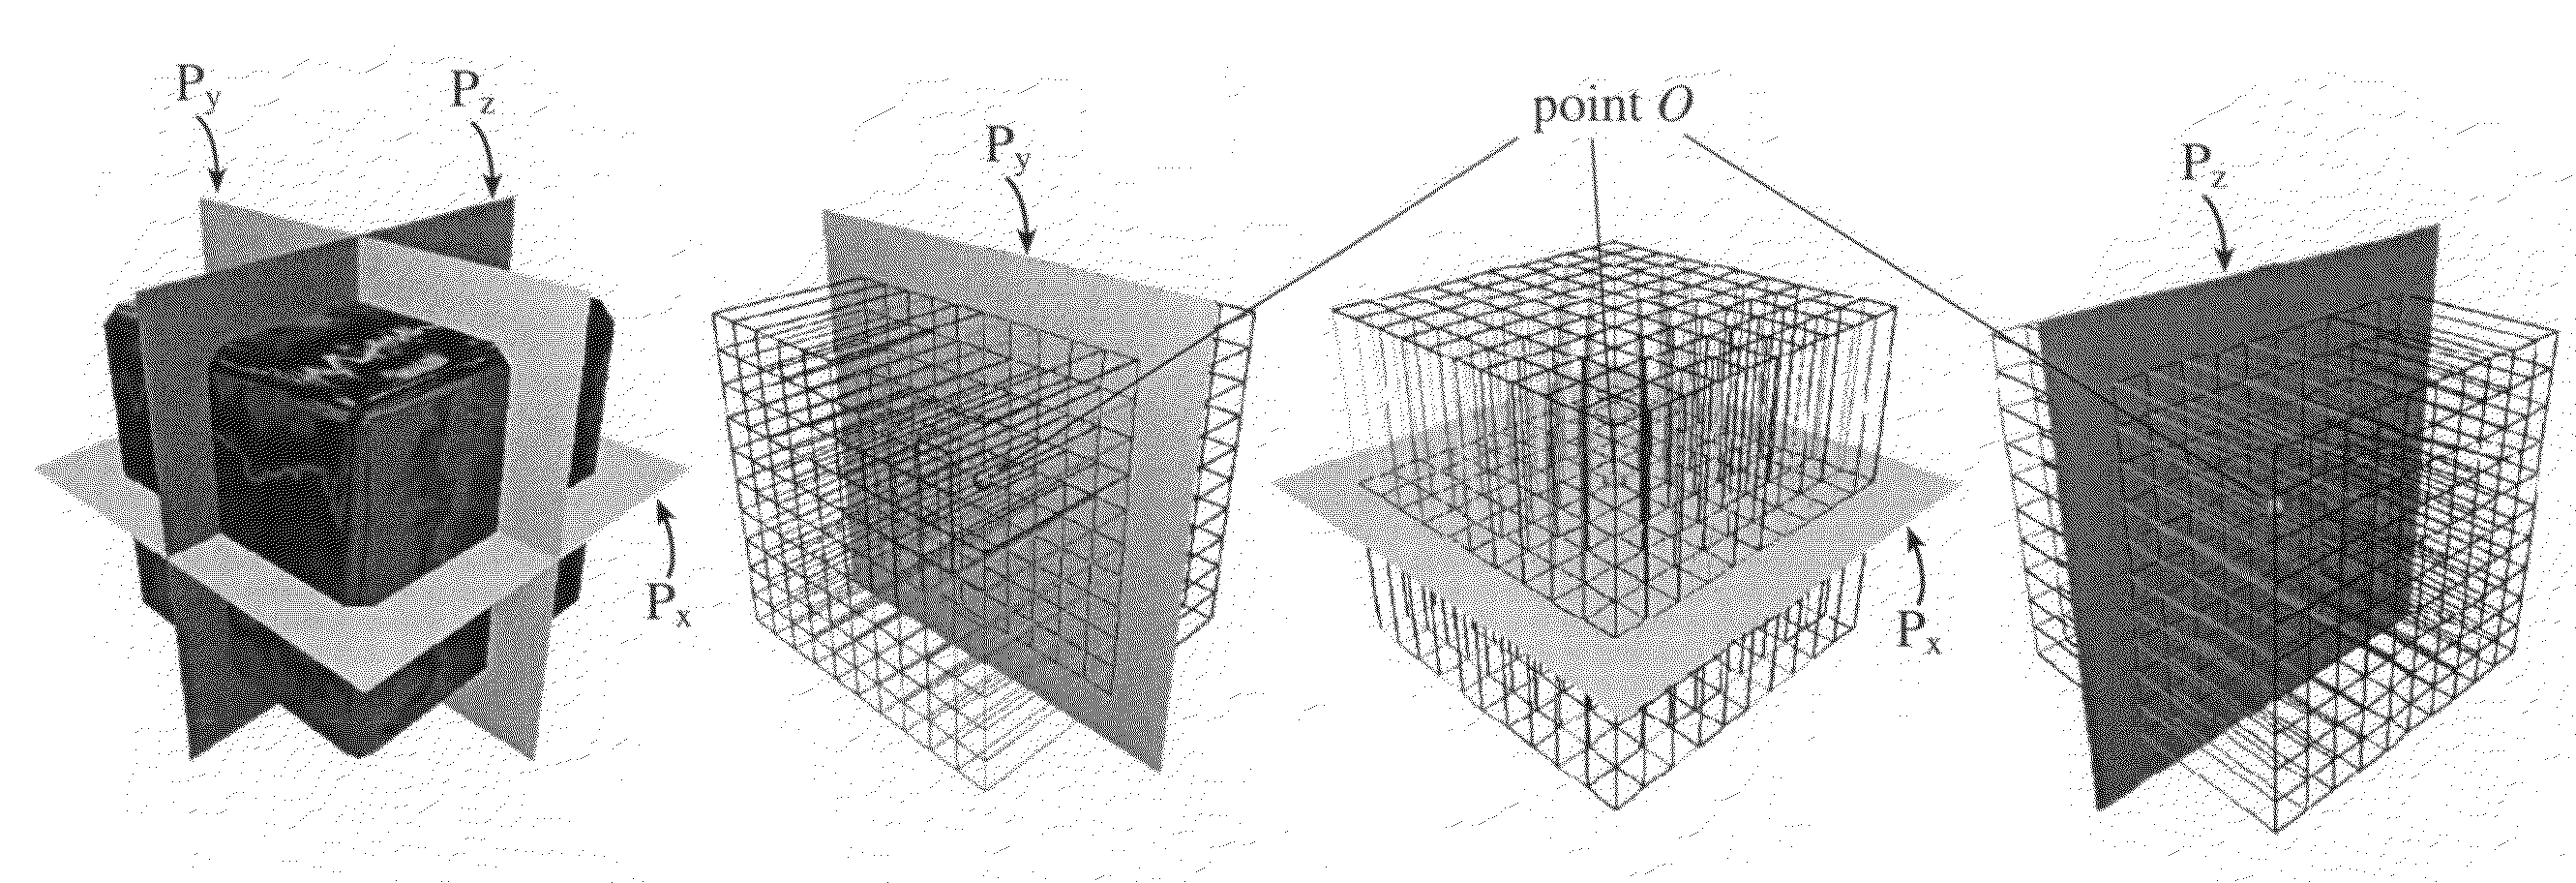 Long elements method for simulation of deformable objects